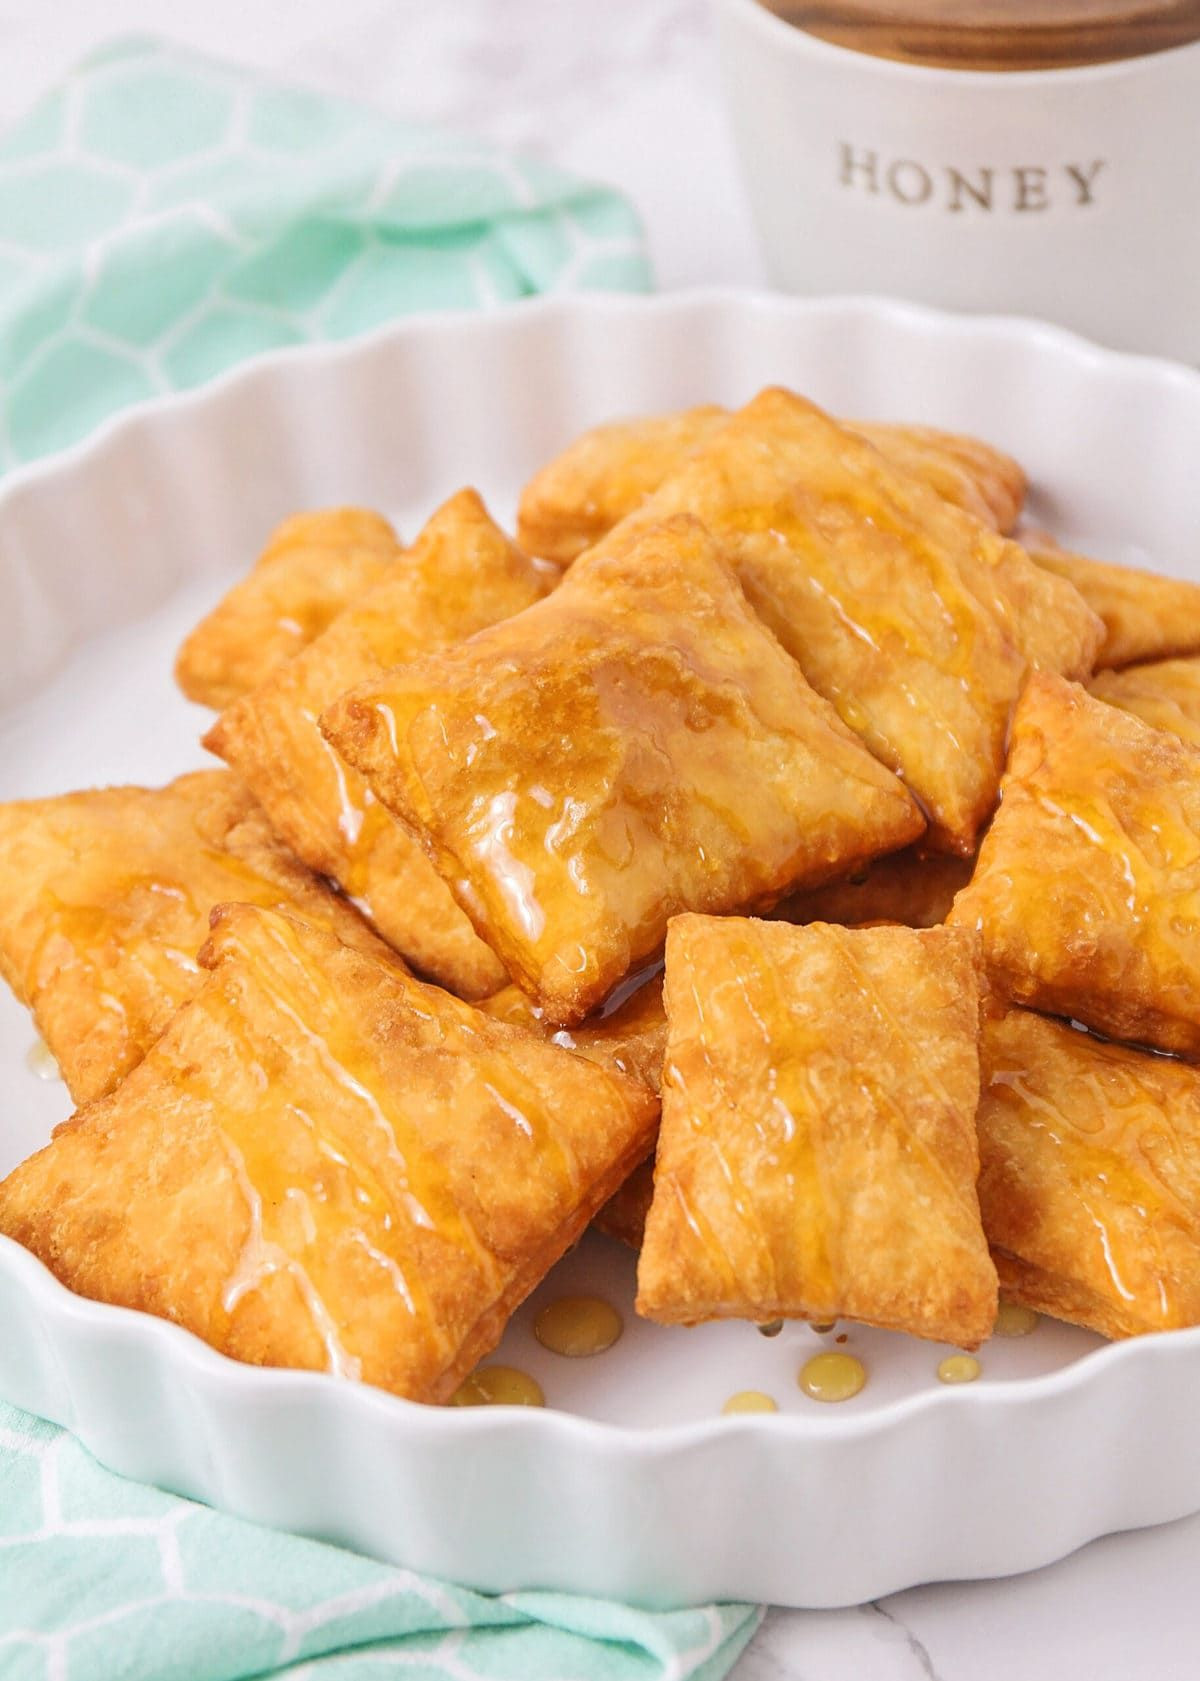 Mexican Dessert sopapilla Beautiful Puffy and Pillowy sopapillas are Fried to Perfection and